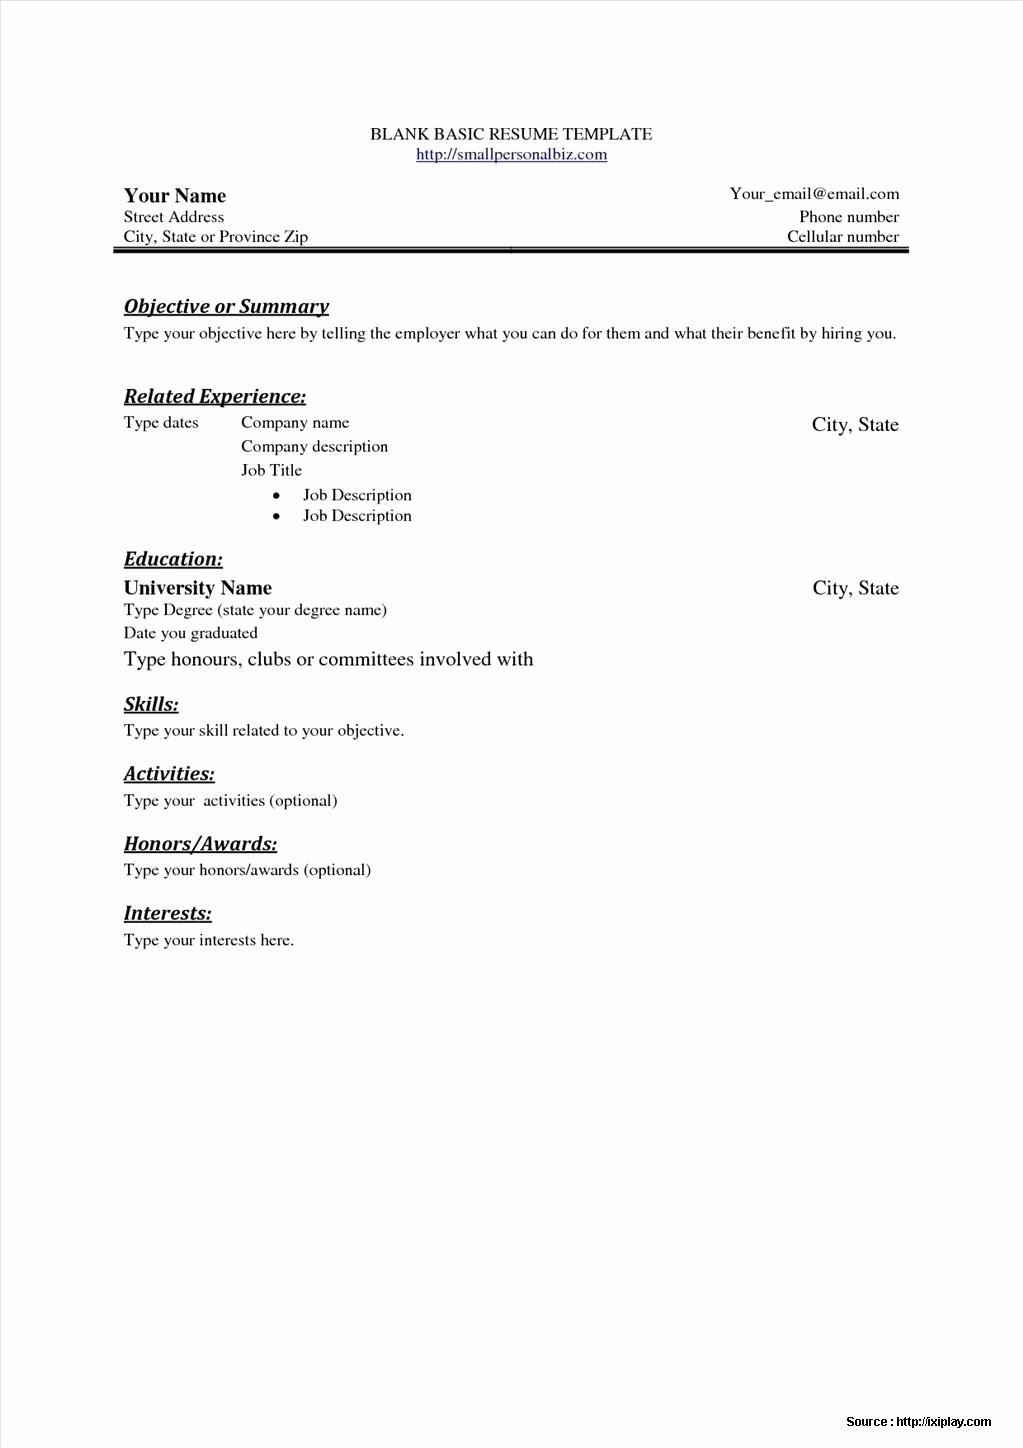 free resume templates for word starter 2010